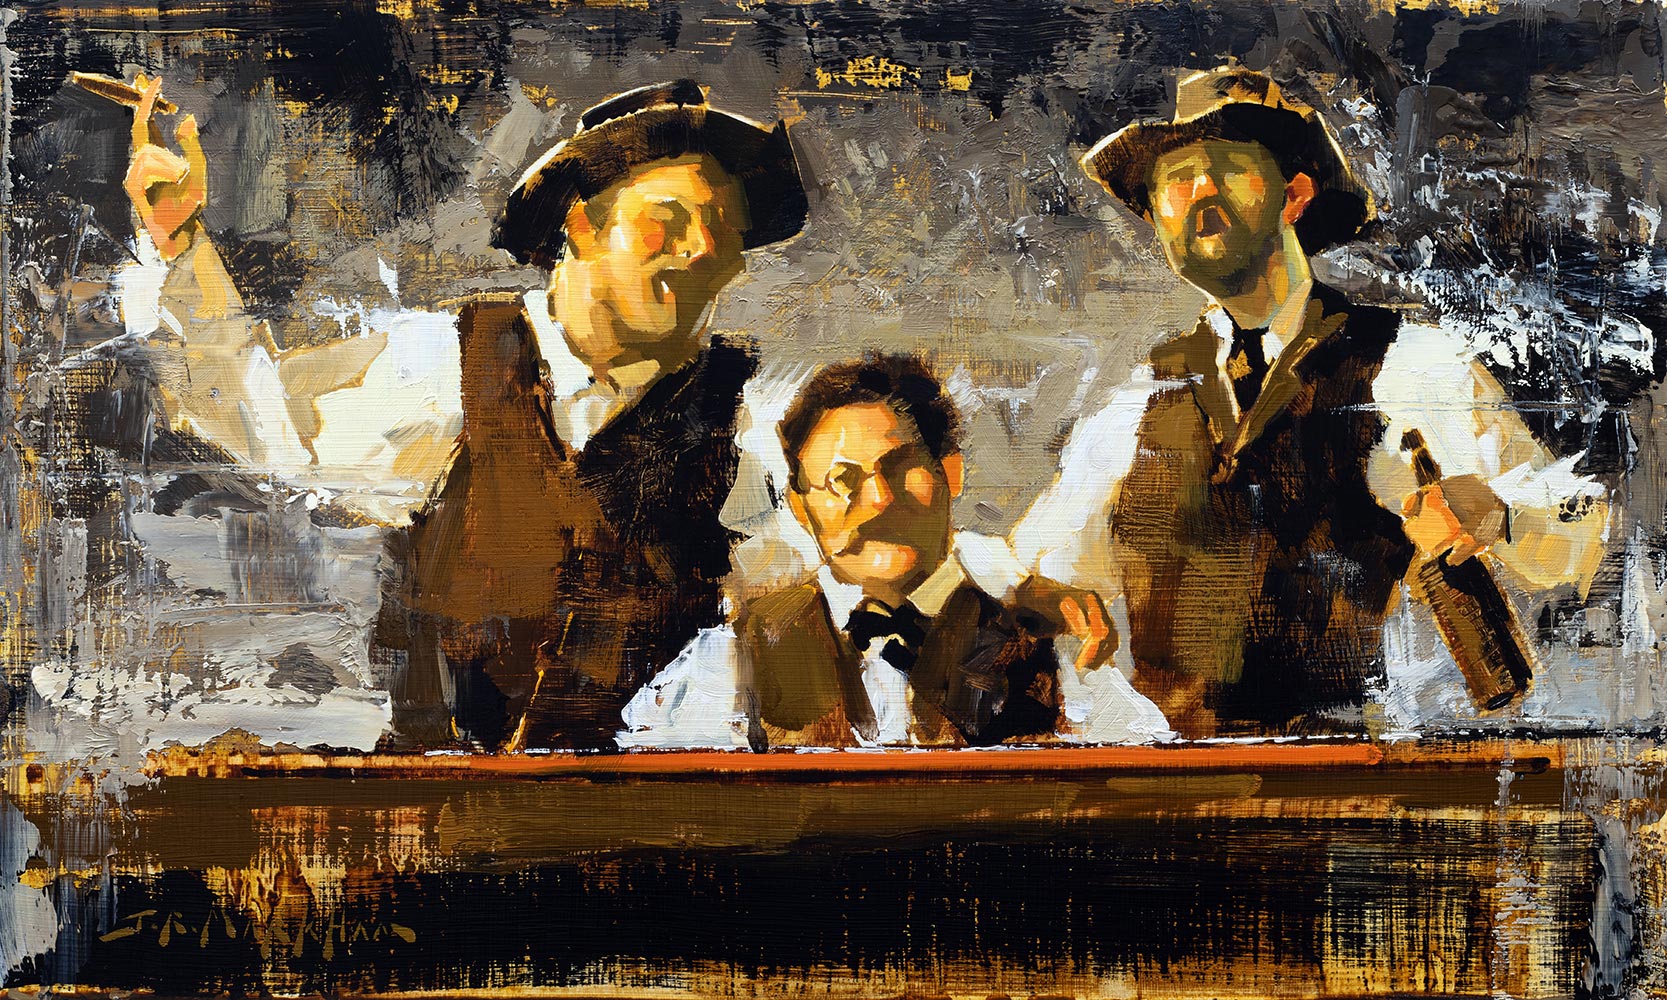 Into the Wee Hours - piano bar singing painting western art by Jerry Markham artist